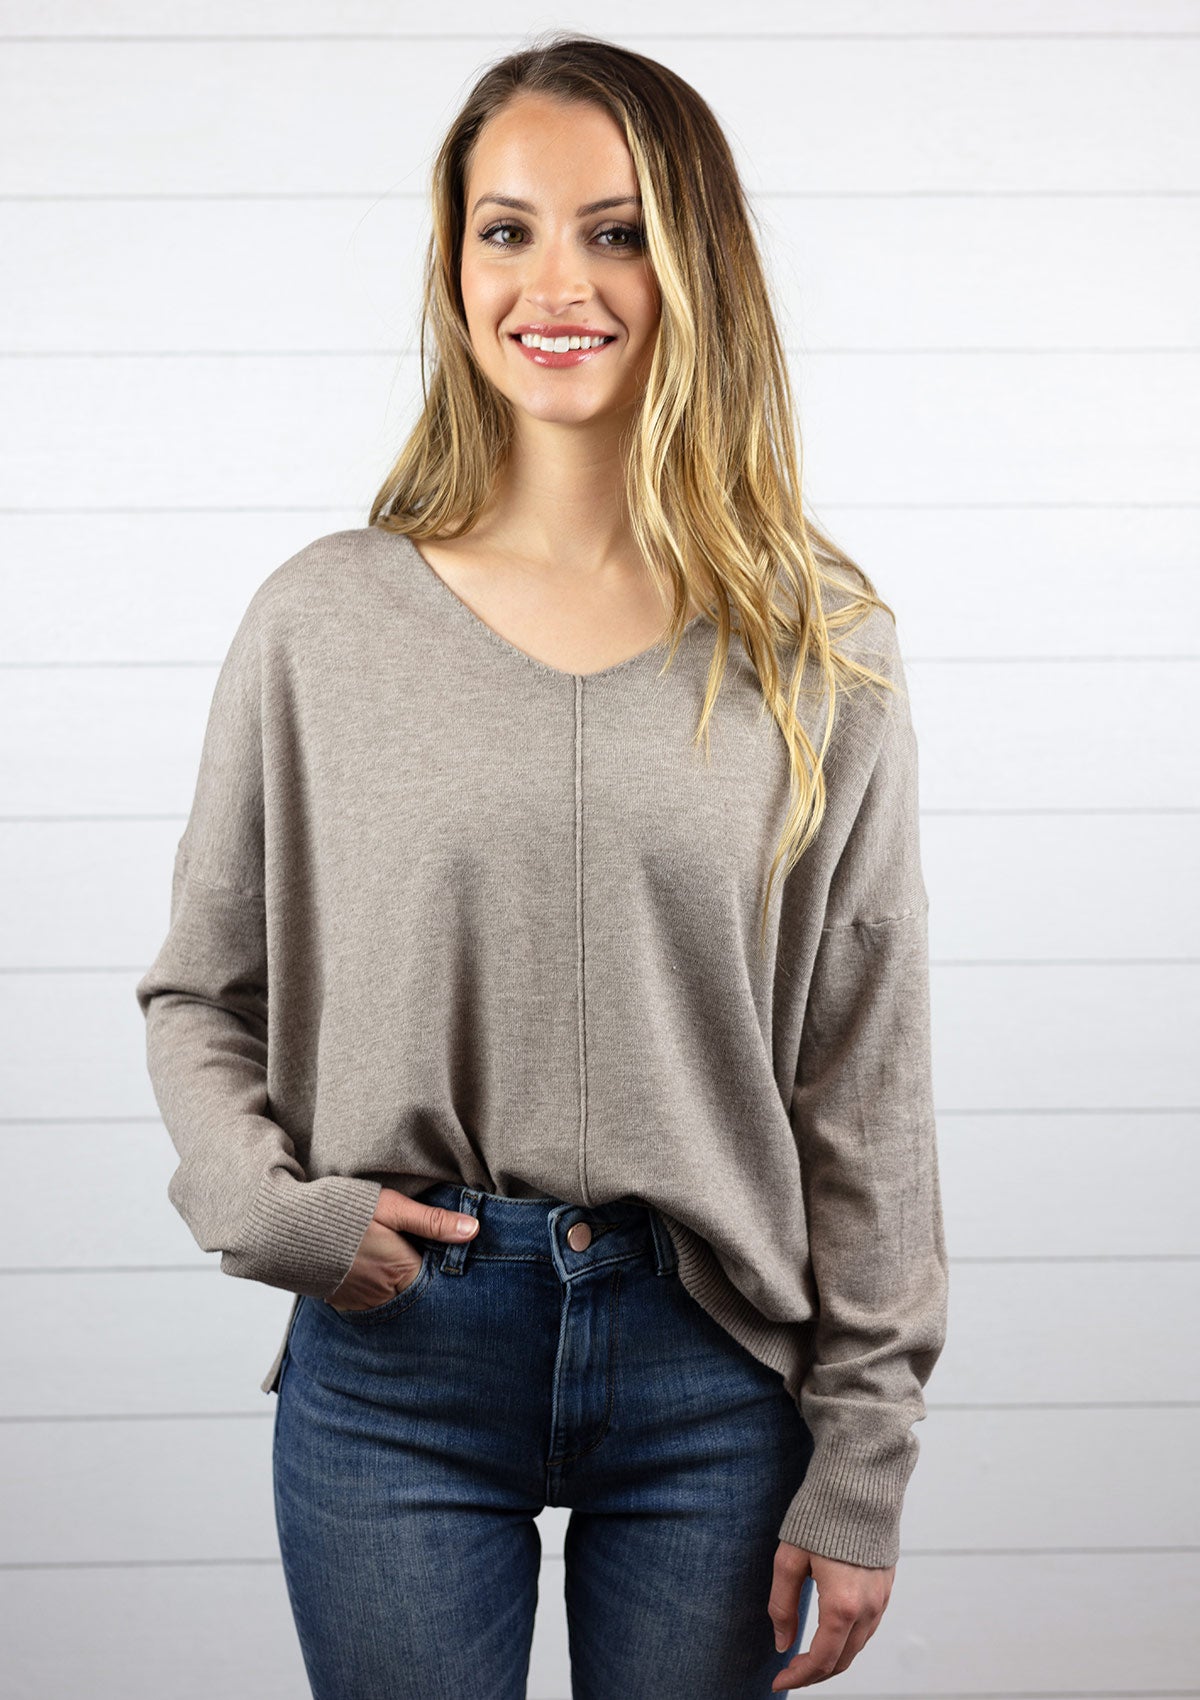 Dreamers Sweater- Neutrals - Long Sleeve, Relaxed Fit, Long in Length, Scoop Neck, Mocha